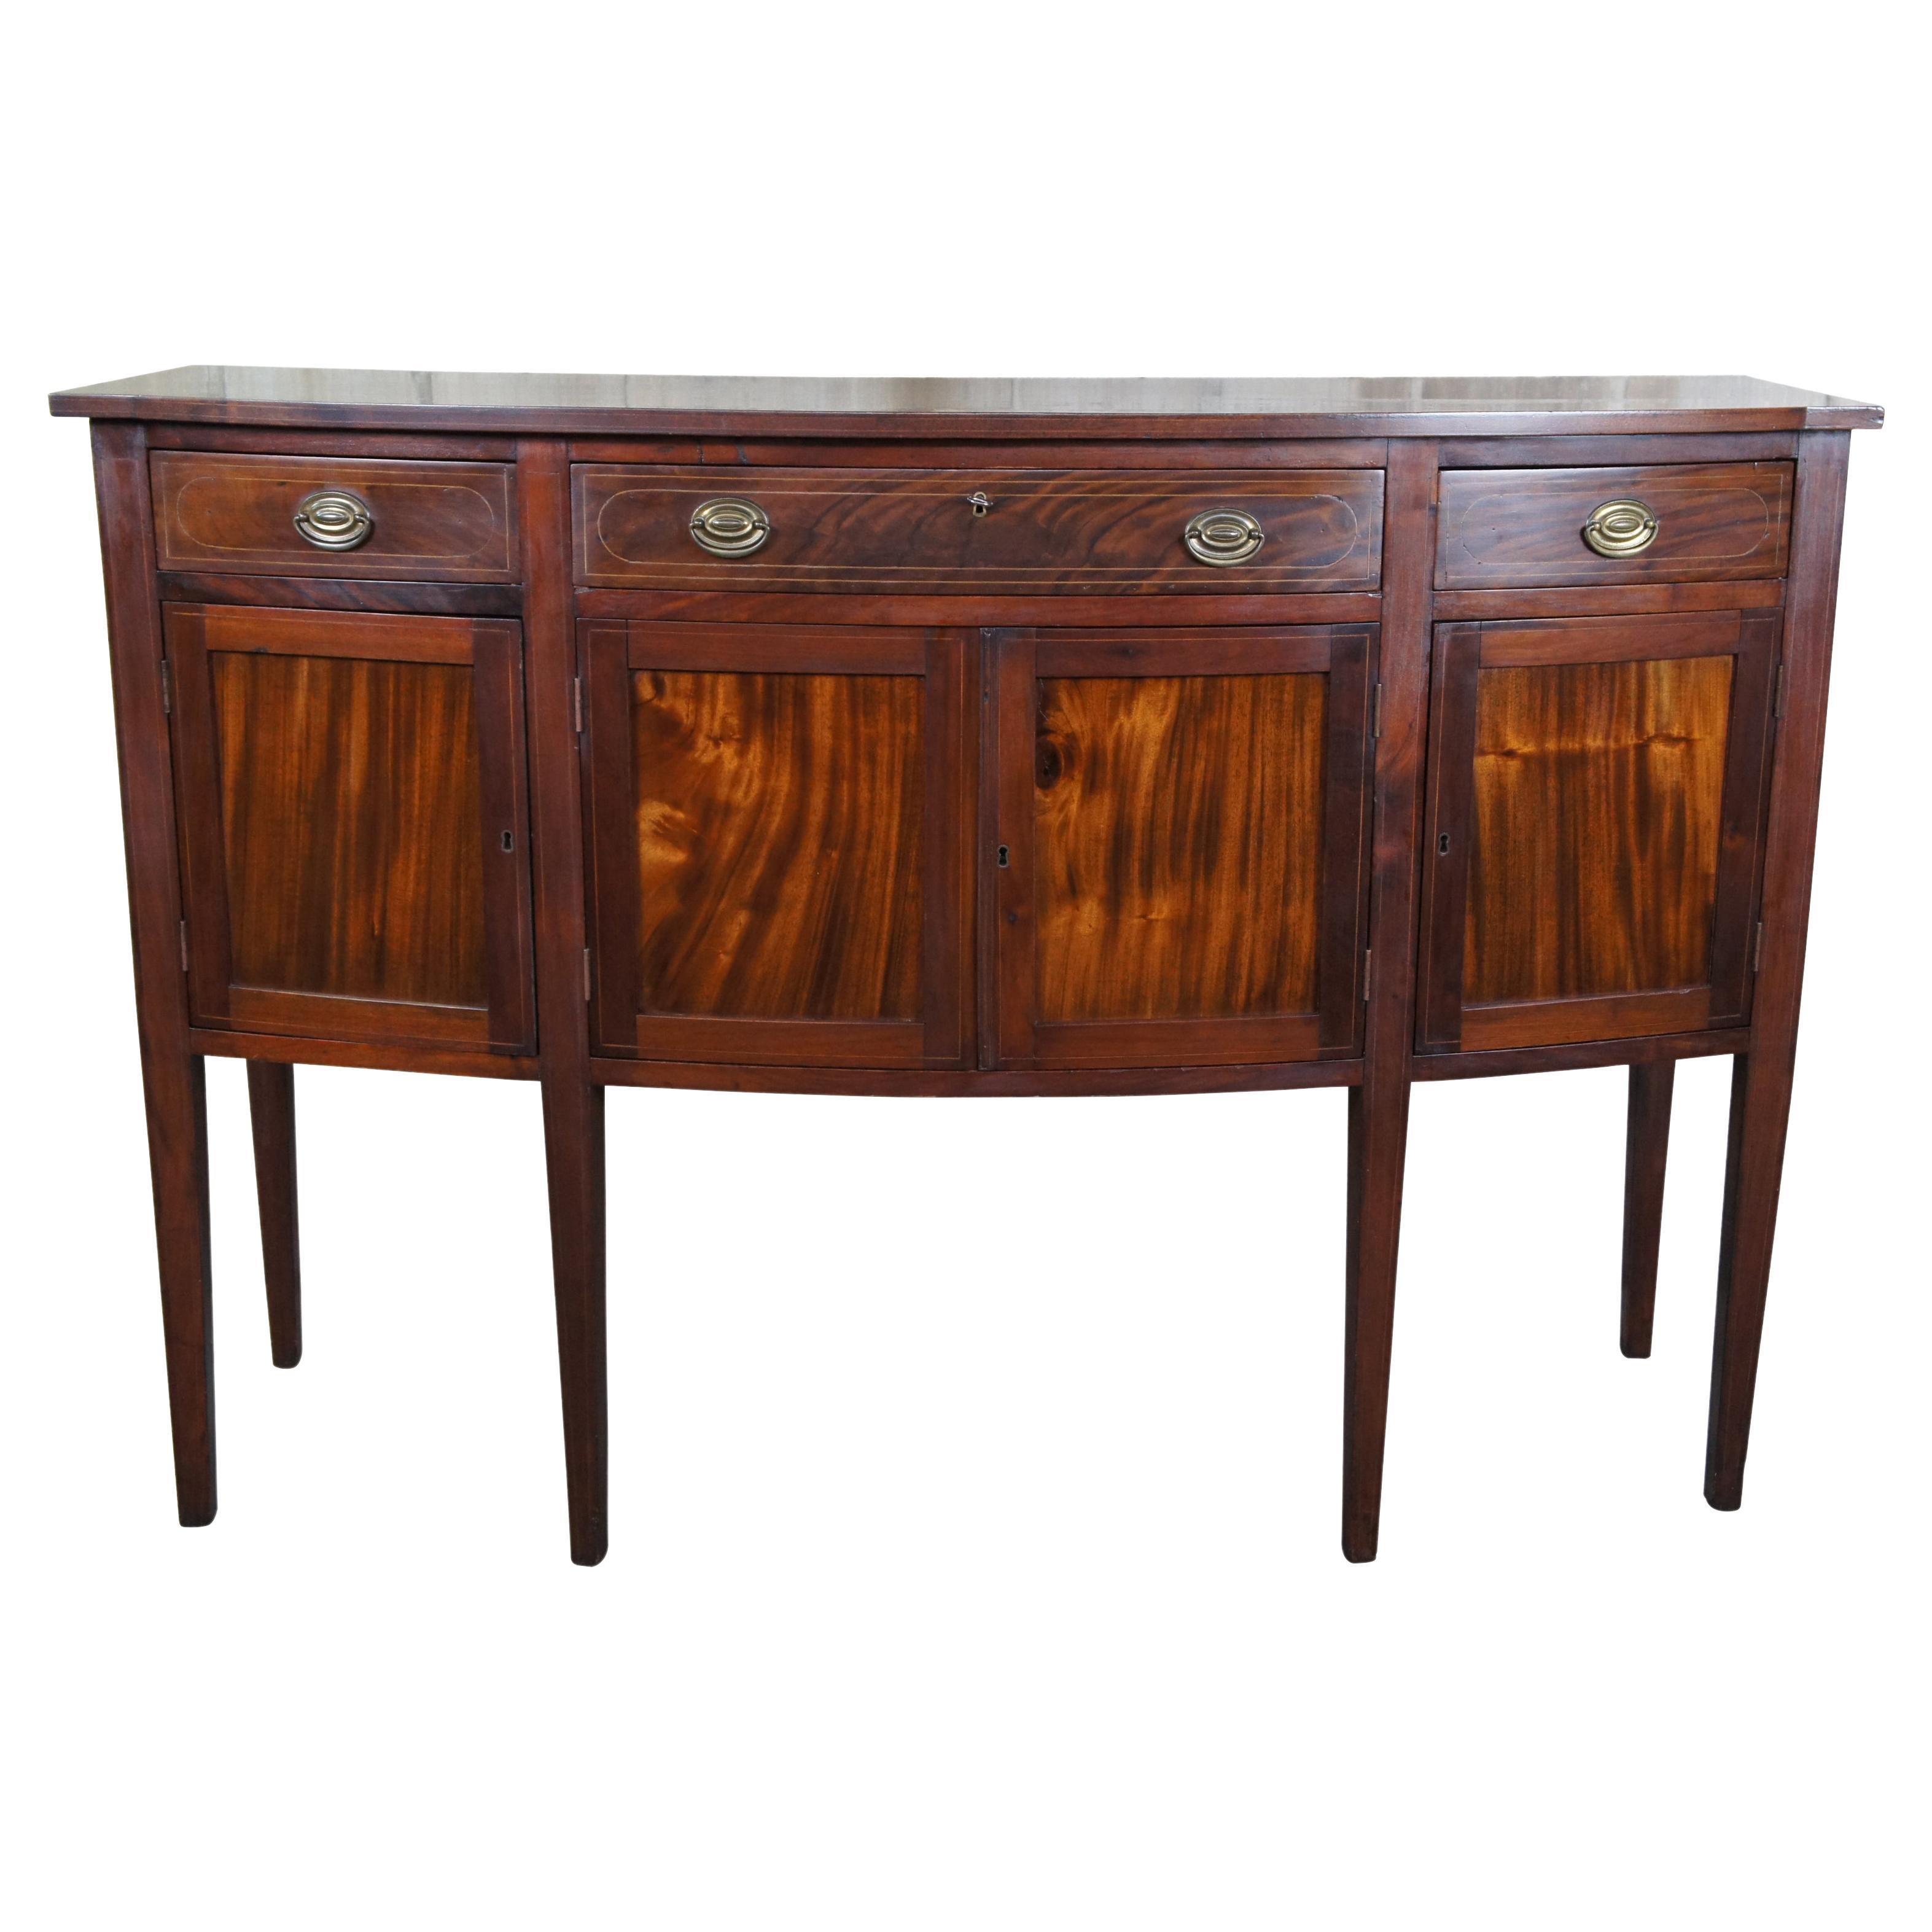 Antique 19th C. American Sheraton Bowfront Mahogany Buffet Sideboard Console